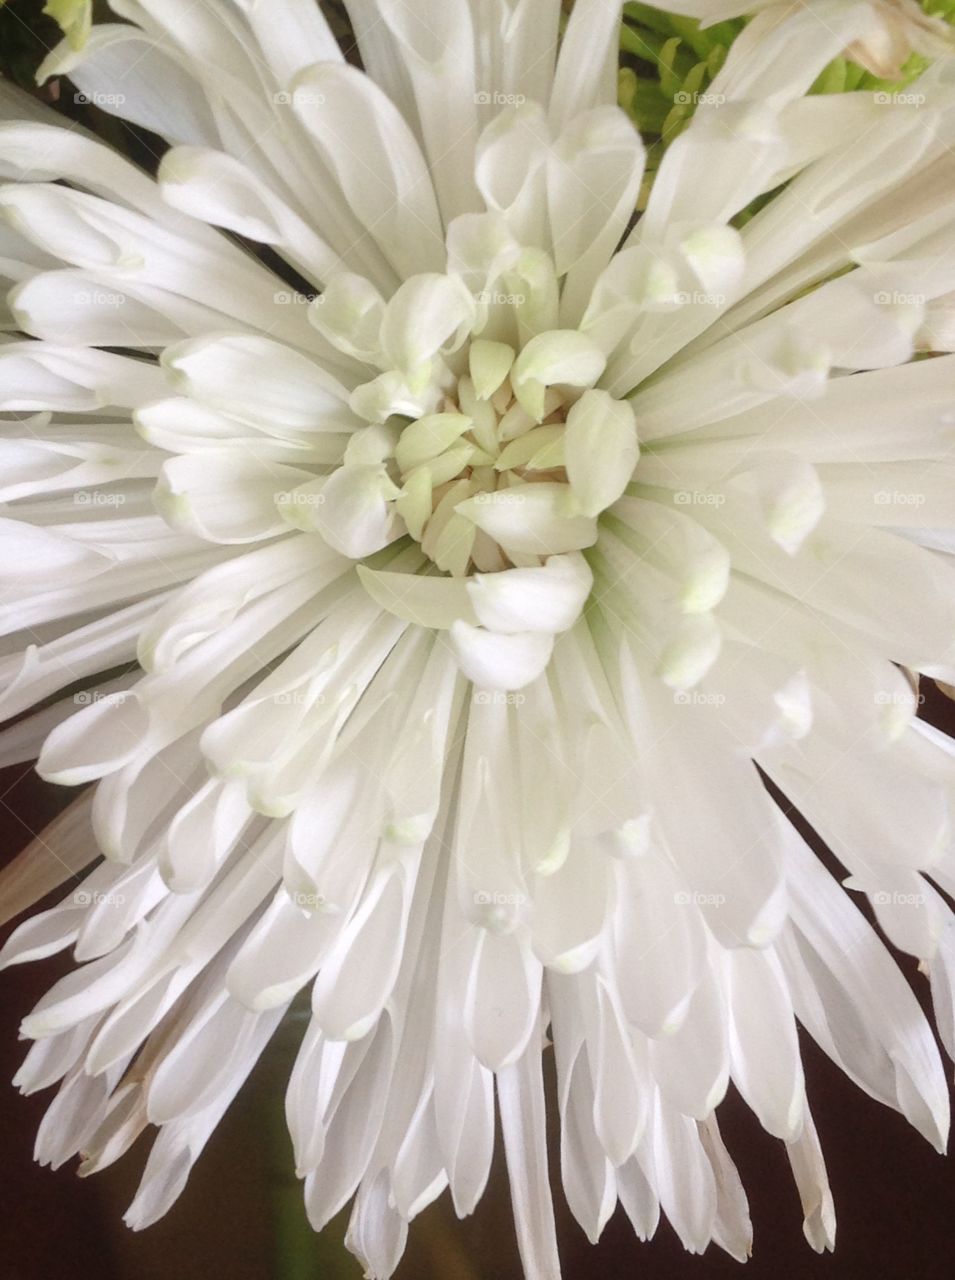 A close up of a beautiful pure white daisy in bloom.